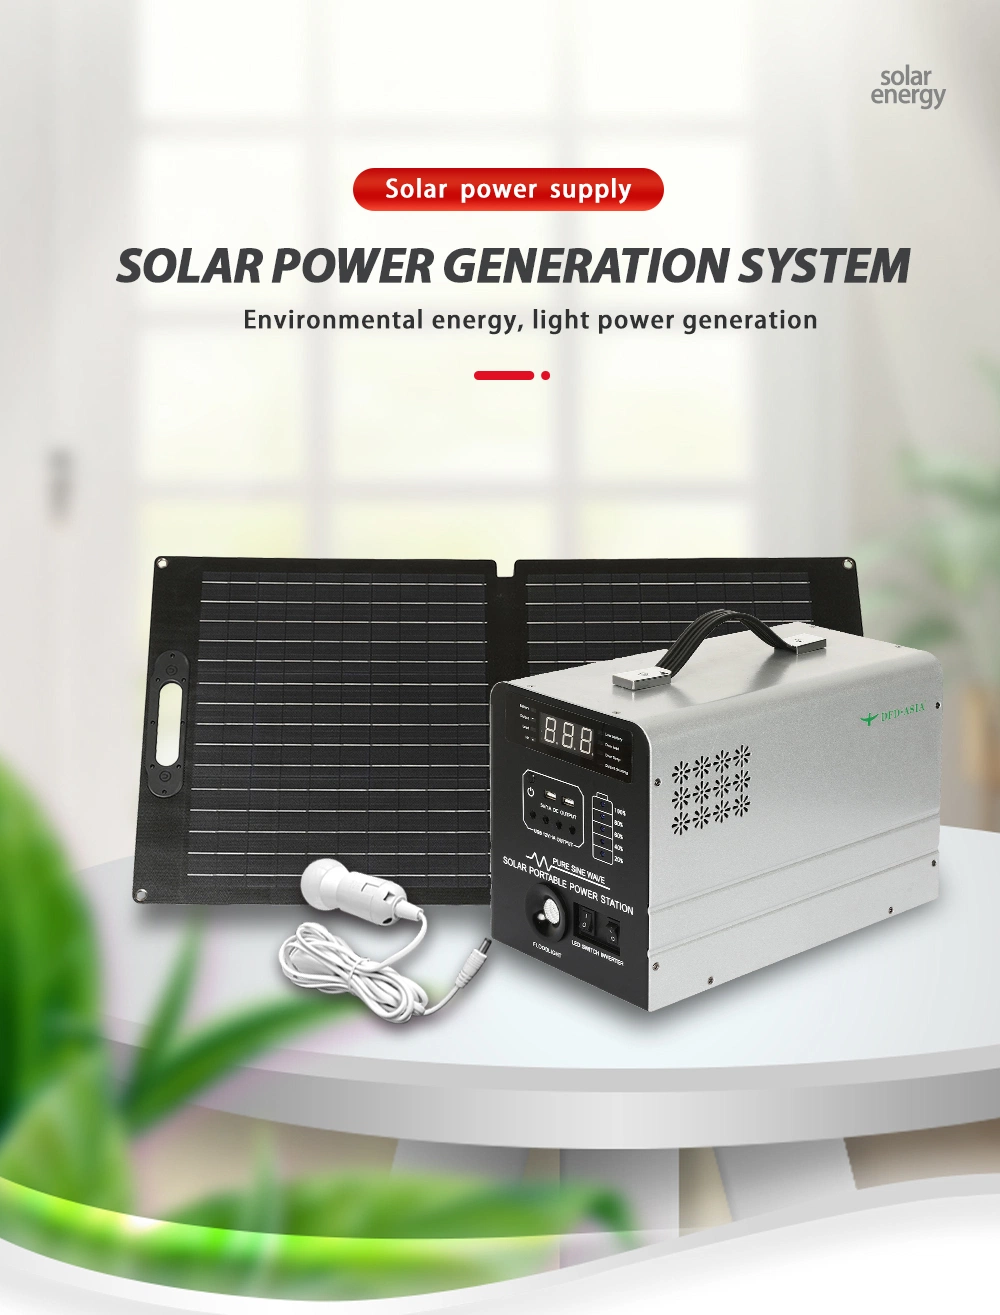 500W 2000W 3000W 4000W 5000W Home Solar Power 220V/100V LiFePO4 Battery Power Bank with Long Cycle Life for Blackout Power Supply Outdoor Live Fishing Camping